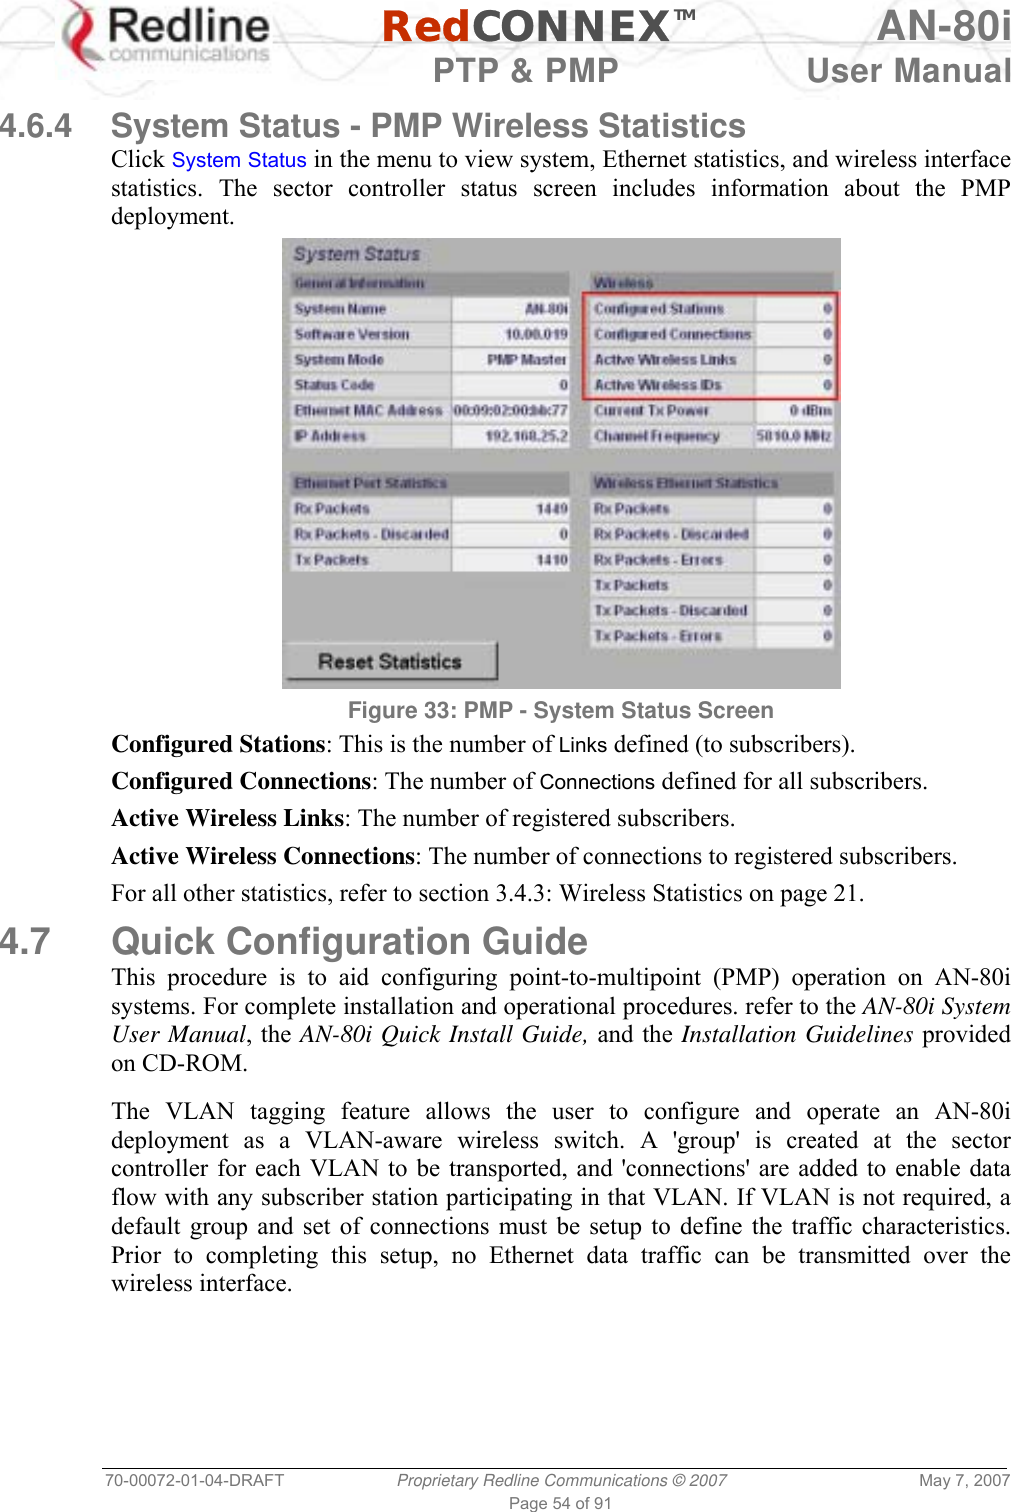   RedCONNEXTM AN-80i   PTP &amp; PMP  User Manual 70-00072-01-04-DRAFT  Proprietary Redline Communications © 2007  May 7, 2007 Page 54 of 91  4.6.4  System Status - PMP Wireless Statistics Click System Status in the menu to view system, Ethernet statistics, and wireless interface statistics. The sector controller status screen includes information about the PMP deployment.  Figure 33: PMP - System Status Screen Configured Stations: This is the number of Links defined (to subscribers). Configured Connections: The number of Connections defined for all subscribers. Active Wireless Links: The number of registered subscribers. Active Wireless Connections: The number of connections to registered subscribers. For all other statistics, refer to section 3.4.3: Wireless Statistics on page 21.  4.7 Quick Configuration Guide This procedure is to aid configuring point-to-multipoint (PMP) operation on AN-80i systems. For complete installation and operational procedures. refer to the AN-80i System User Manual, the AN-80i Quick Install Guide, and the Installation Guidelines provided on CD-ROM.  The VLAN tagging feature allows the user to configure and operate an AN-80i deployment as a VLAN-aware wireless switch. A &apos;group&apos; is created at the sector controller for each VLAN to be transported, and &apos;connections&apos; are added to enable data flow with any subscriber station participating in that VLAN. If VLAN is not required, a default group and set of connections must be setup to define the traffic characteristics. Prior to completing this setup, no Ethernet data traffic can be transmitted over the wireless interface.  